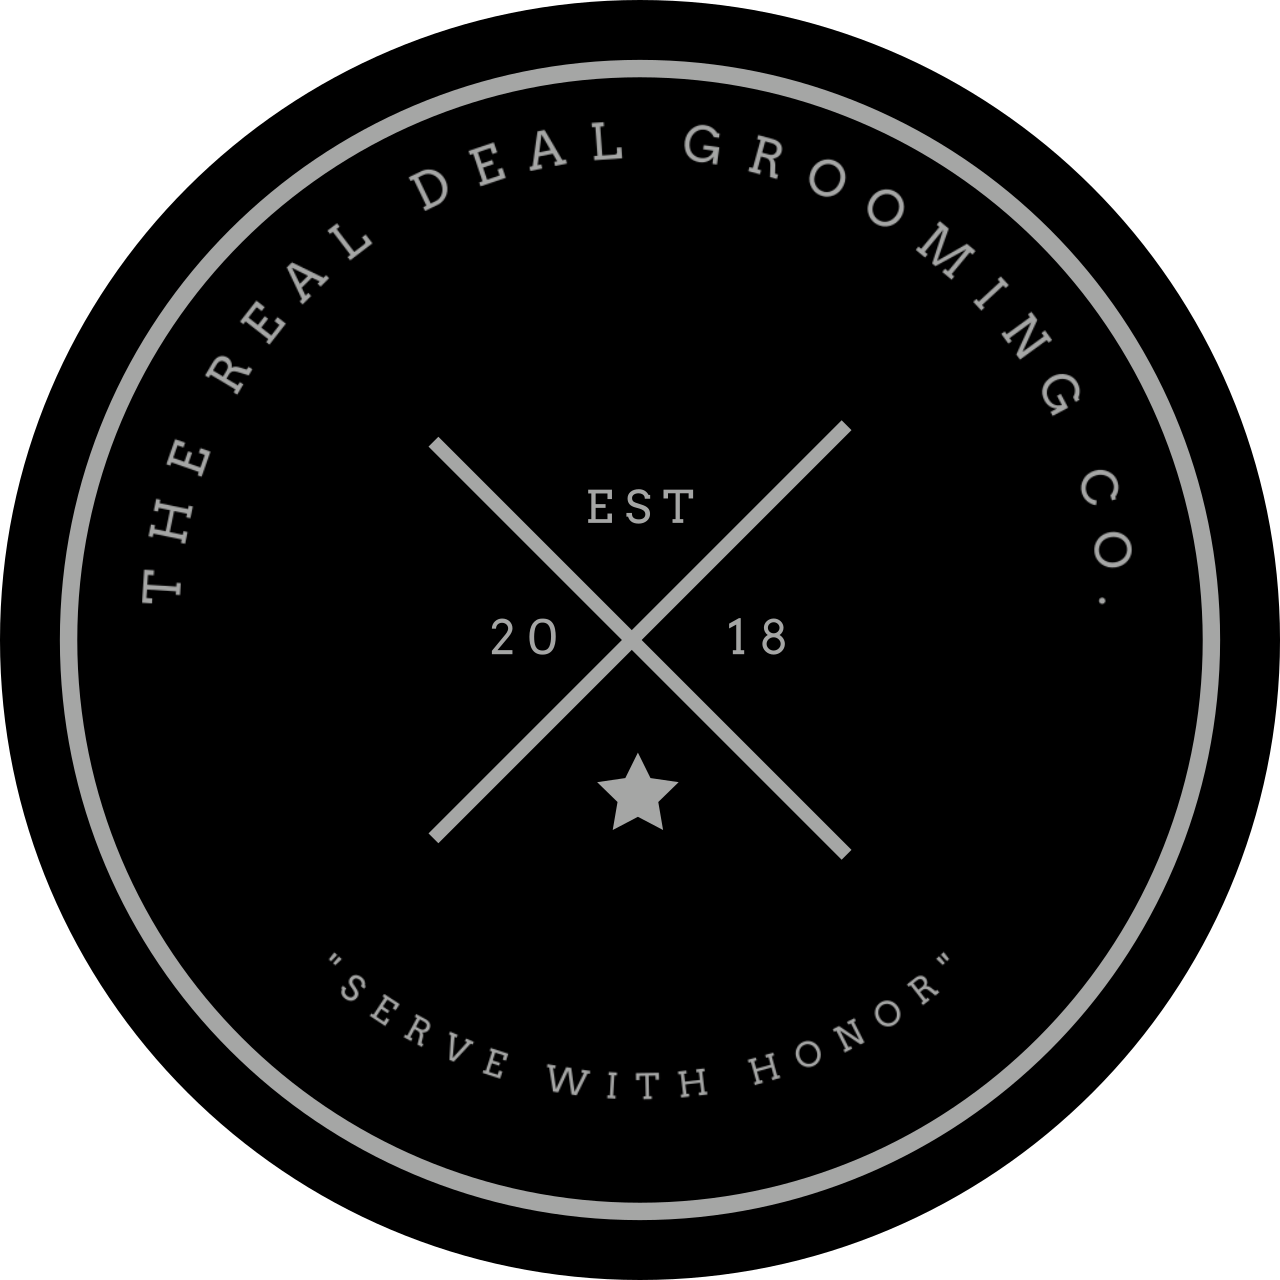 The Real Deal Grooming Co.'s logo